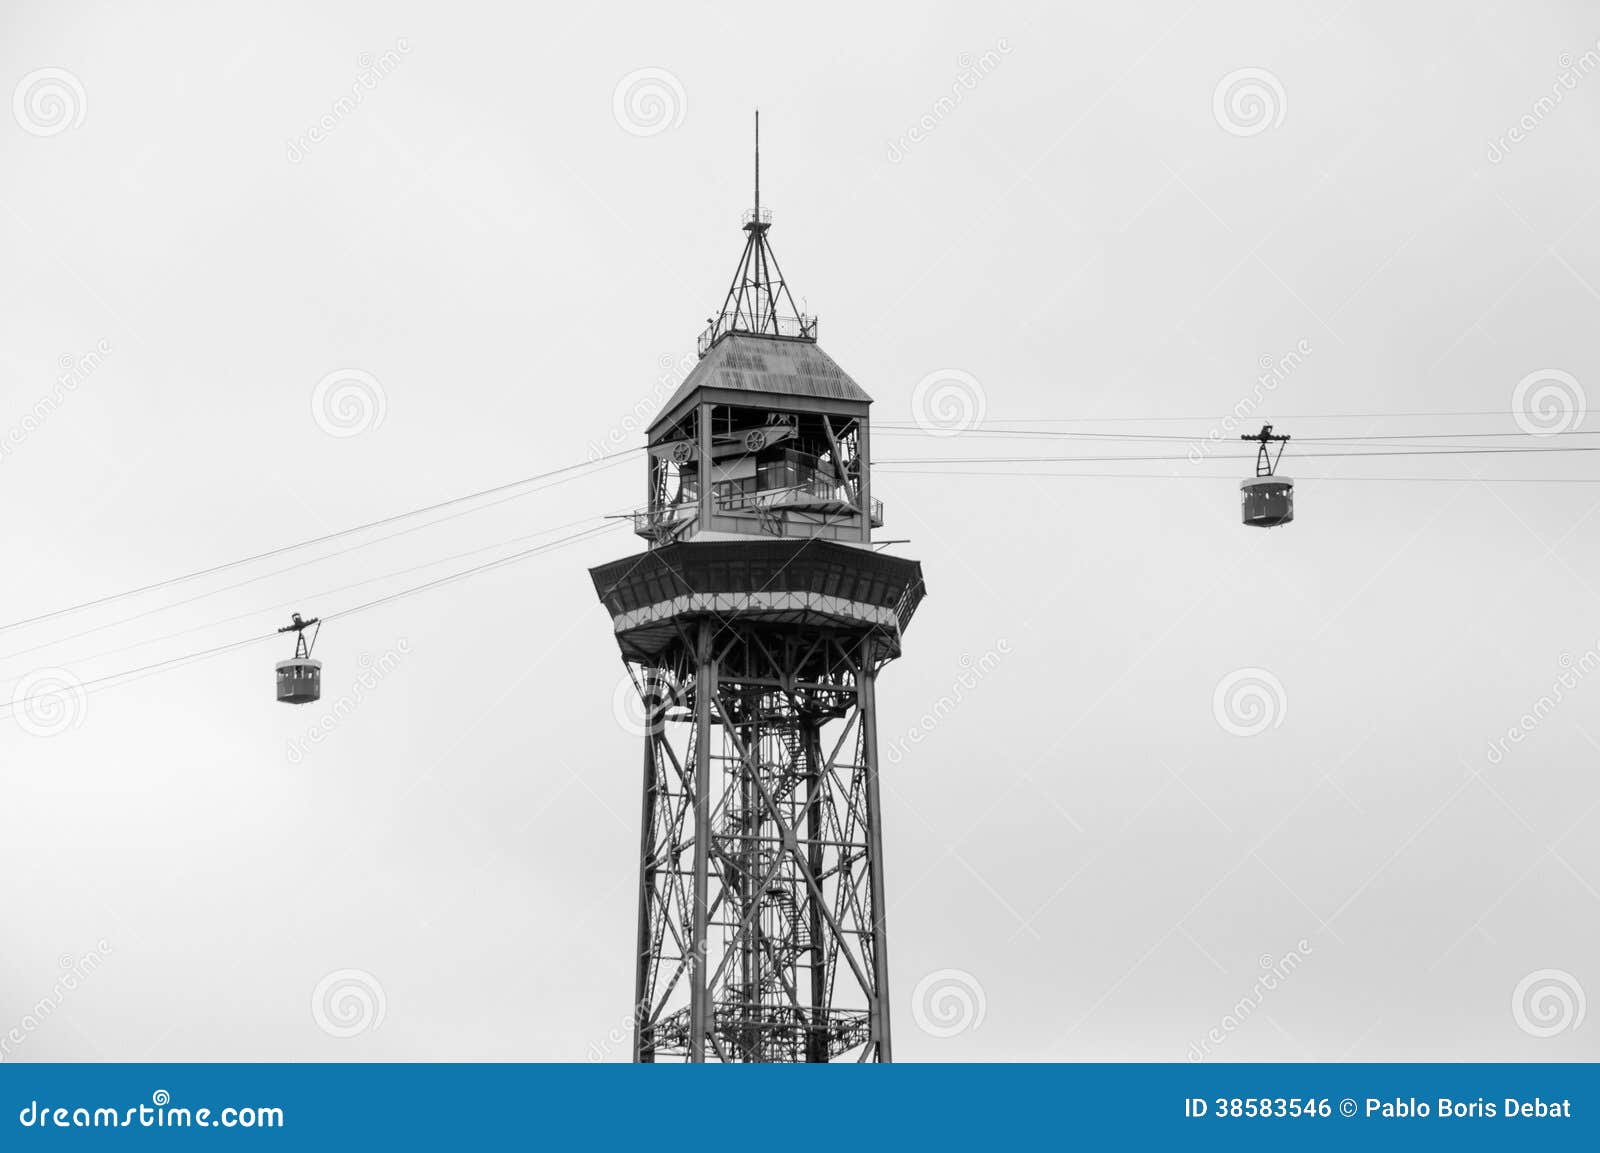 teleferico montjuic and two cabin at barcelona